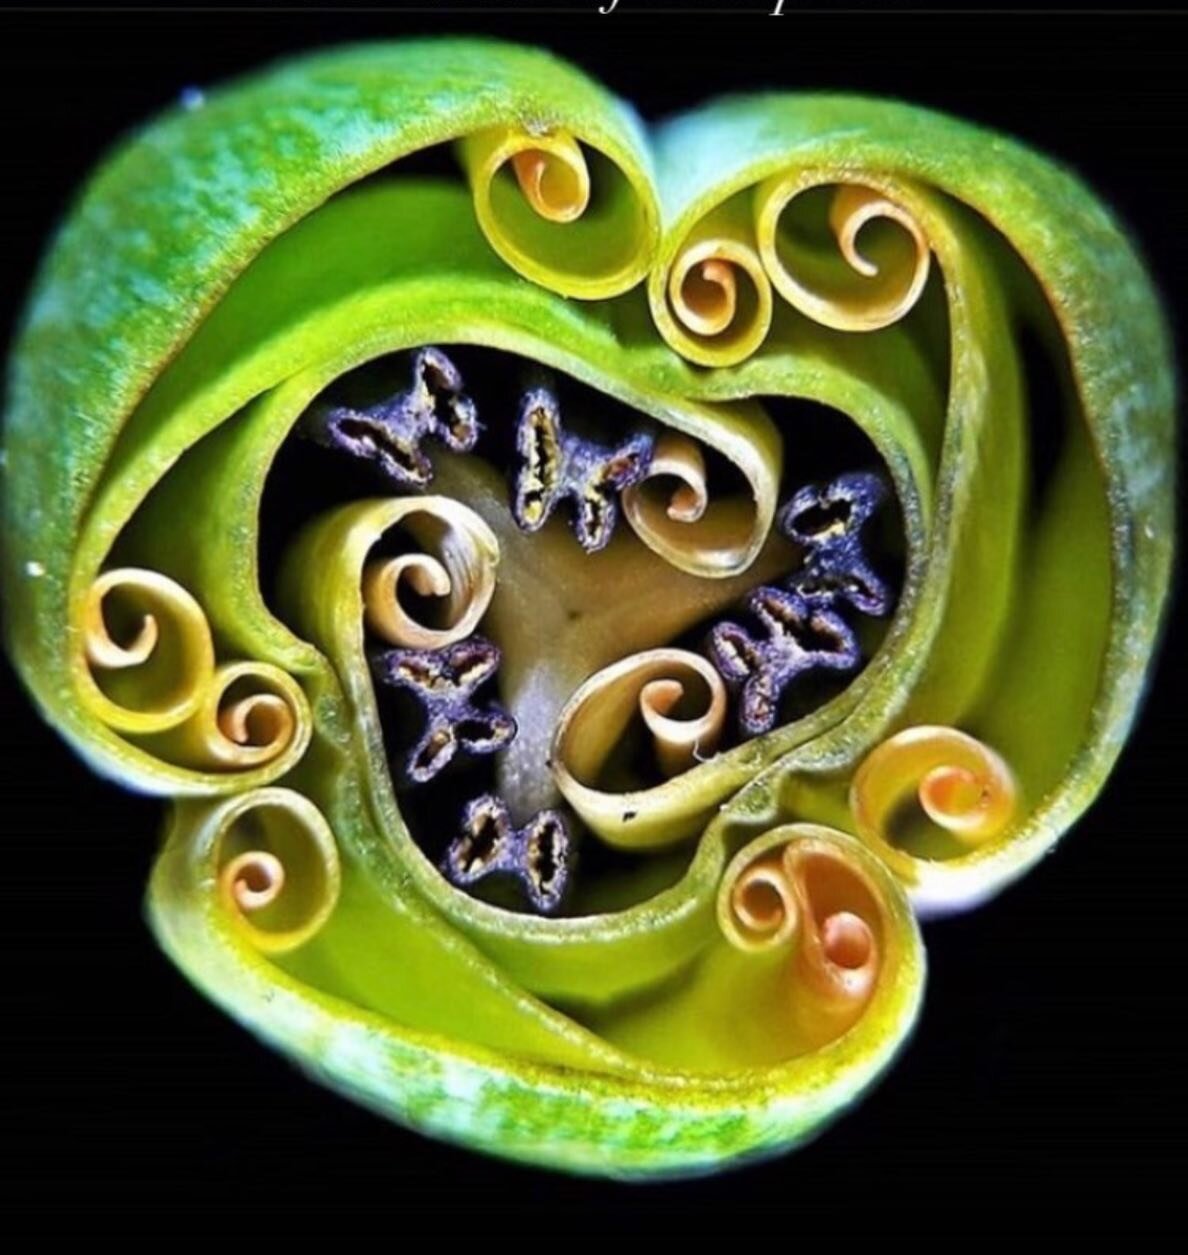 Cross section of a Tulip bud.
Everything that is alive on earth contains and produces some form of medicine&hellip;
Including YOU!

#dulcemadretierra #sweetmotherearth